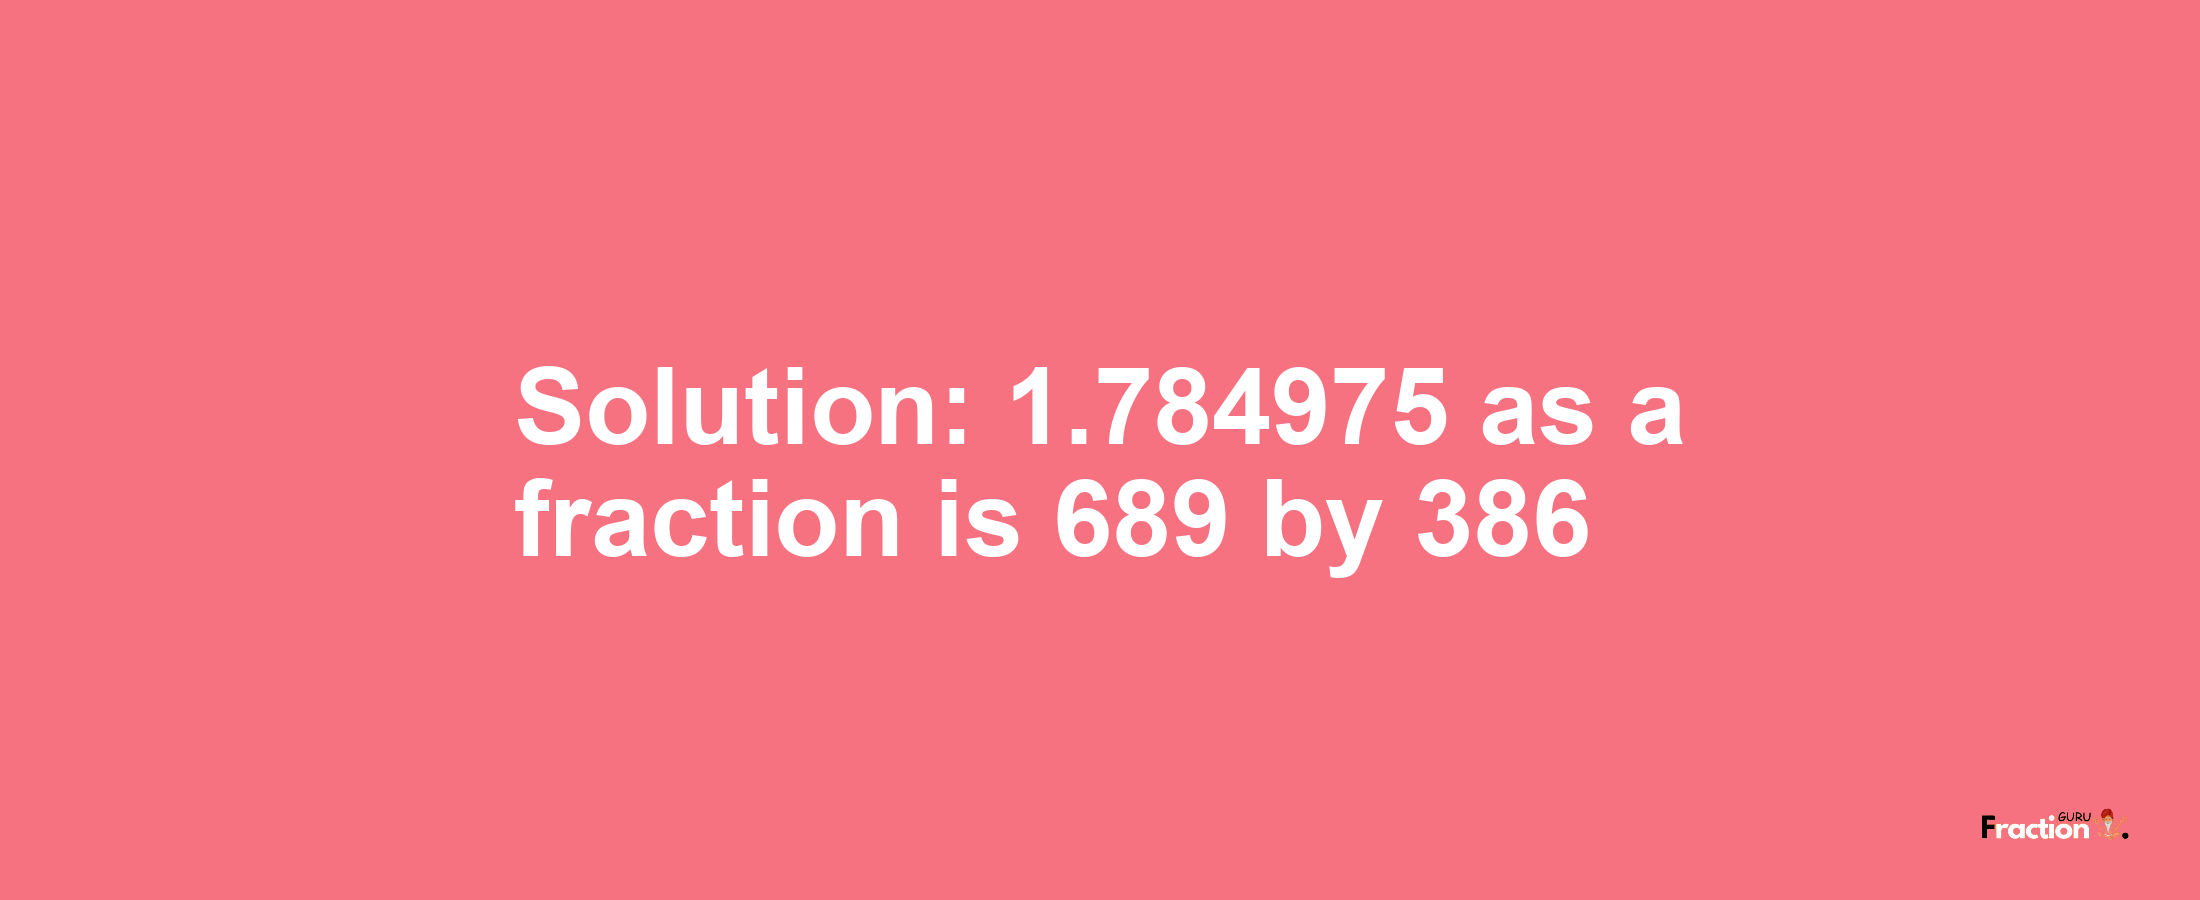 Solution:1.784975 as a fraction is 689/386